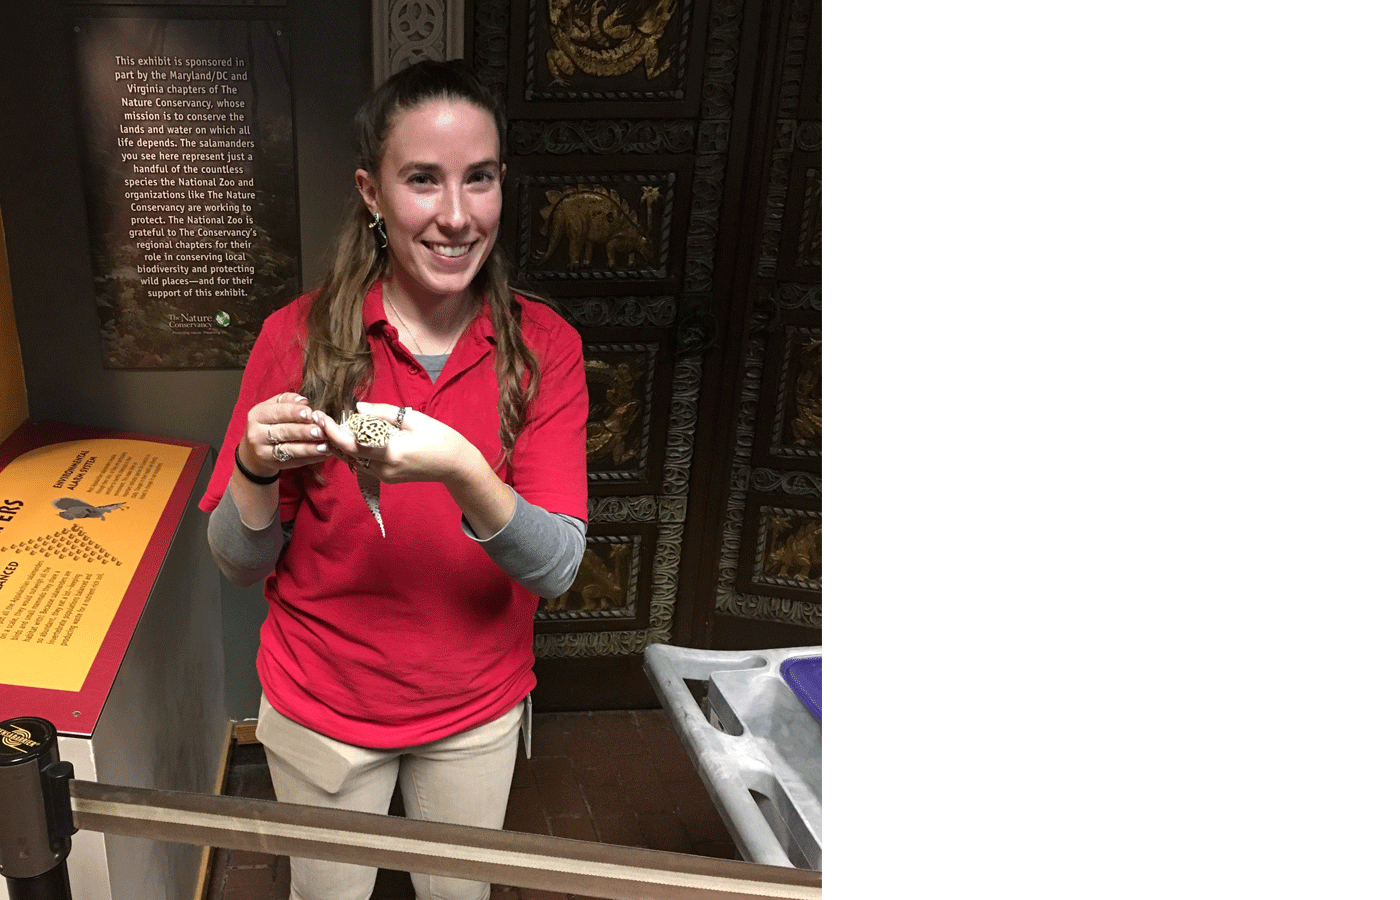 A Zoo volunteer stands in an exhibit area at Reptile Discovery Center and holds a small lizard